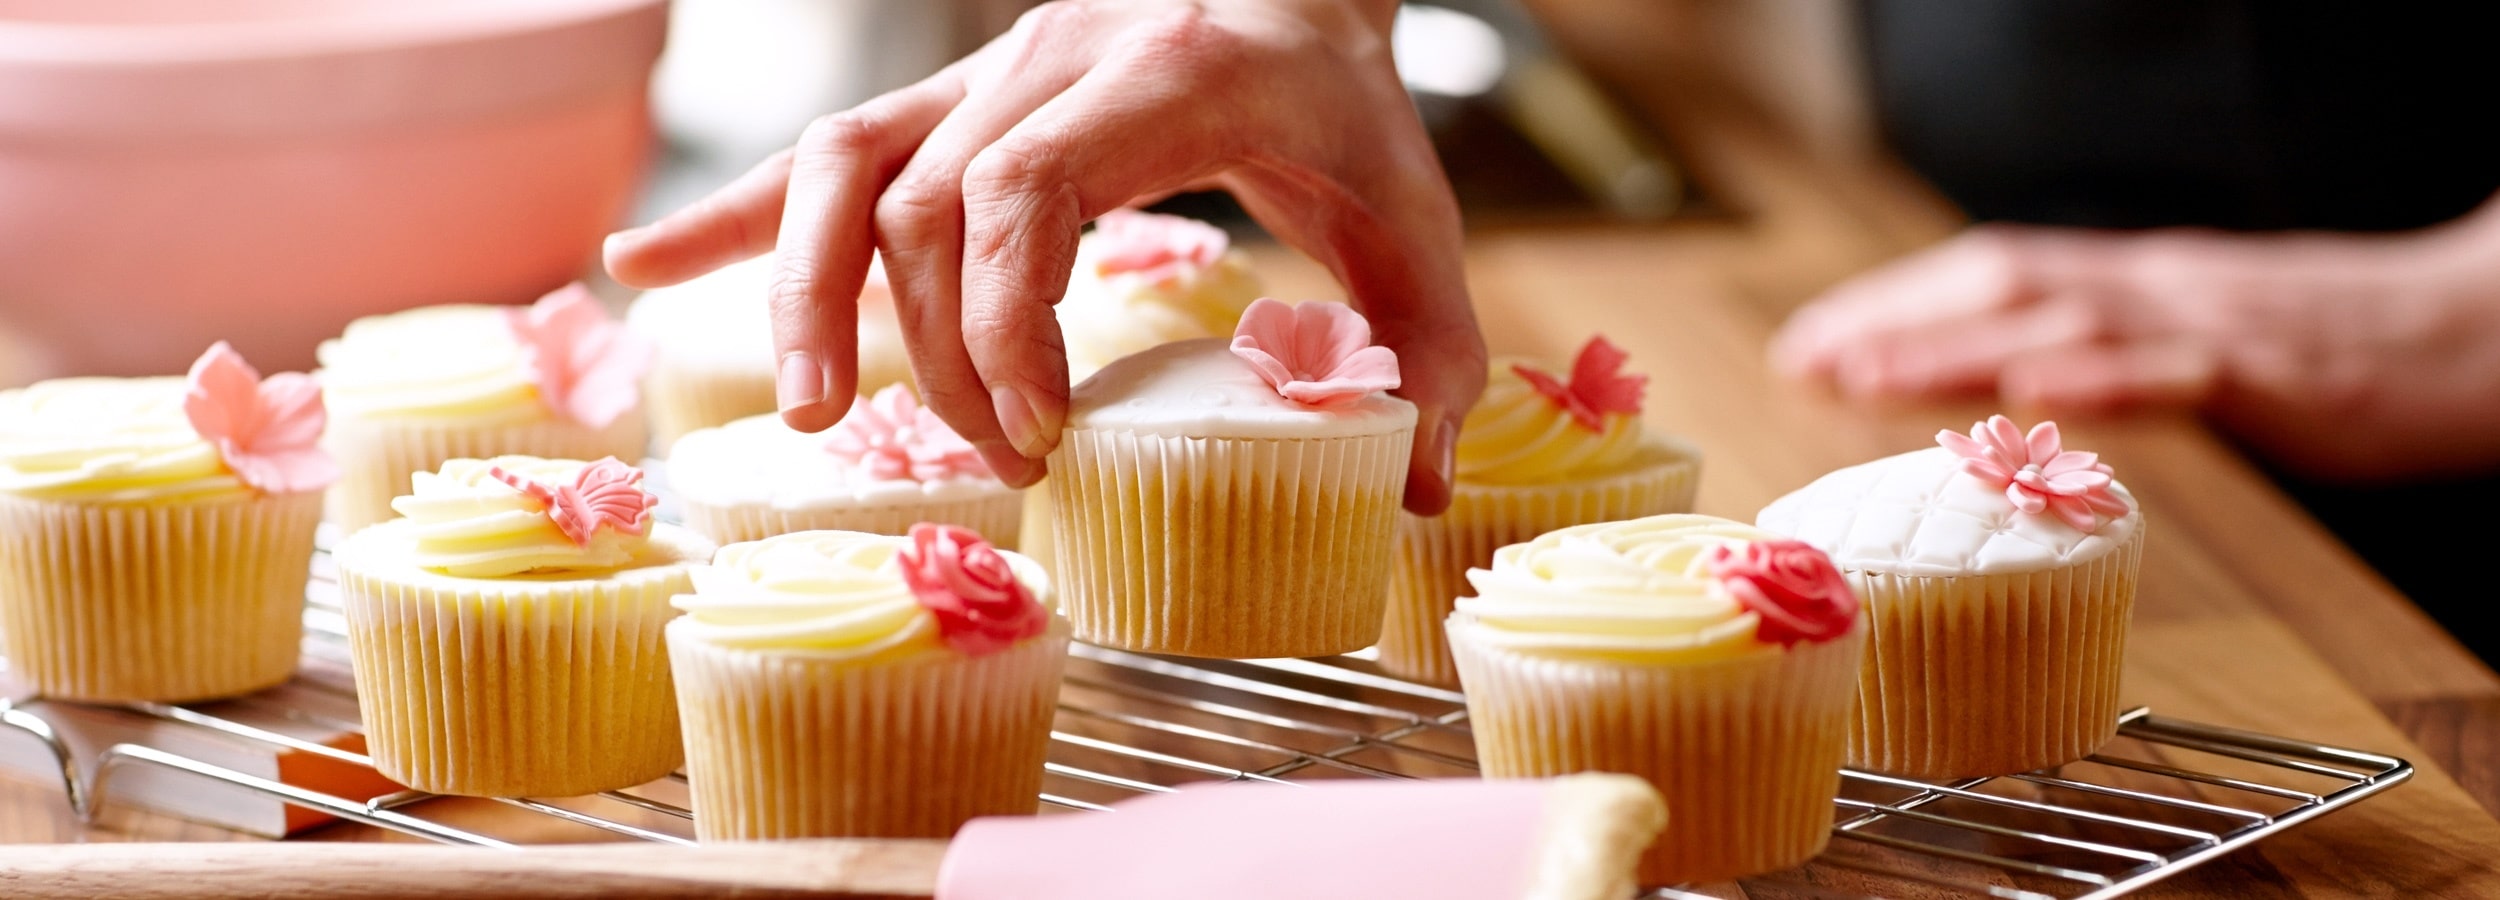 Cupcakes can contain starches, sugars and naturally occurring sweeteners